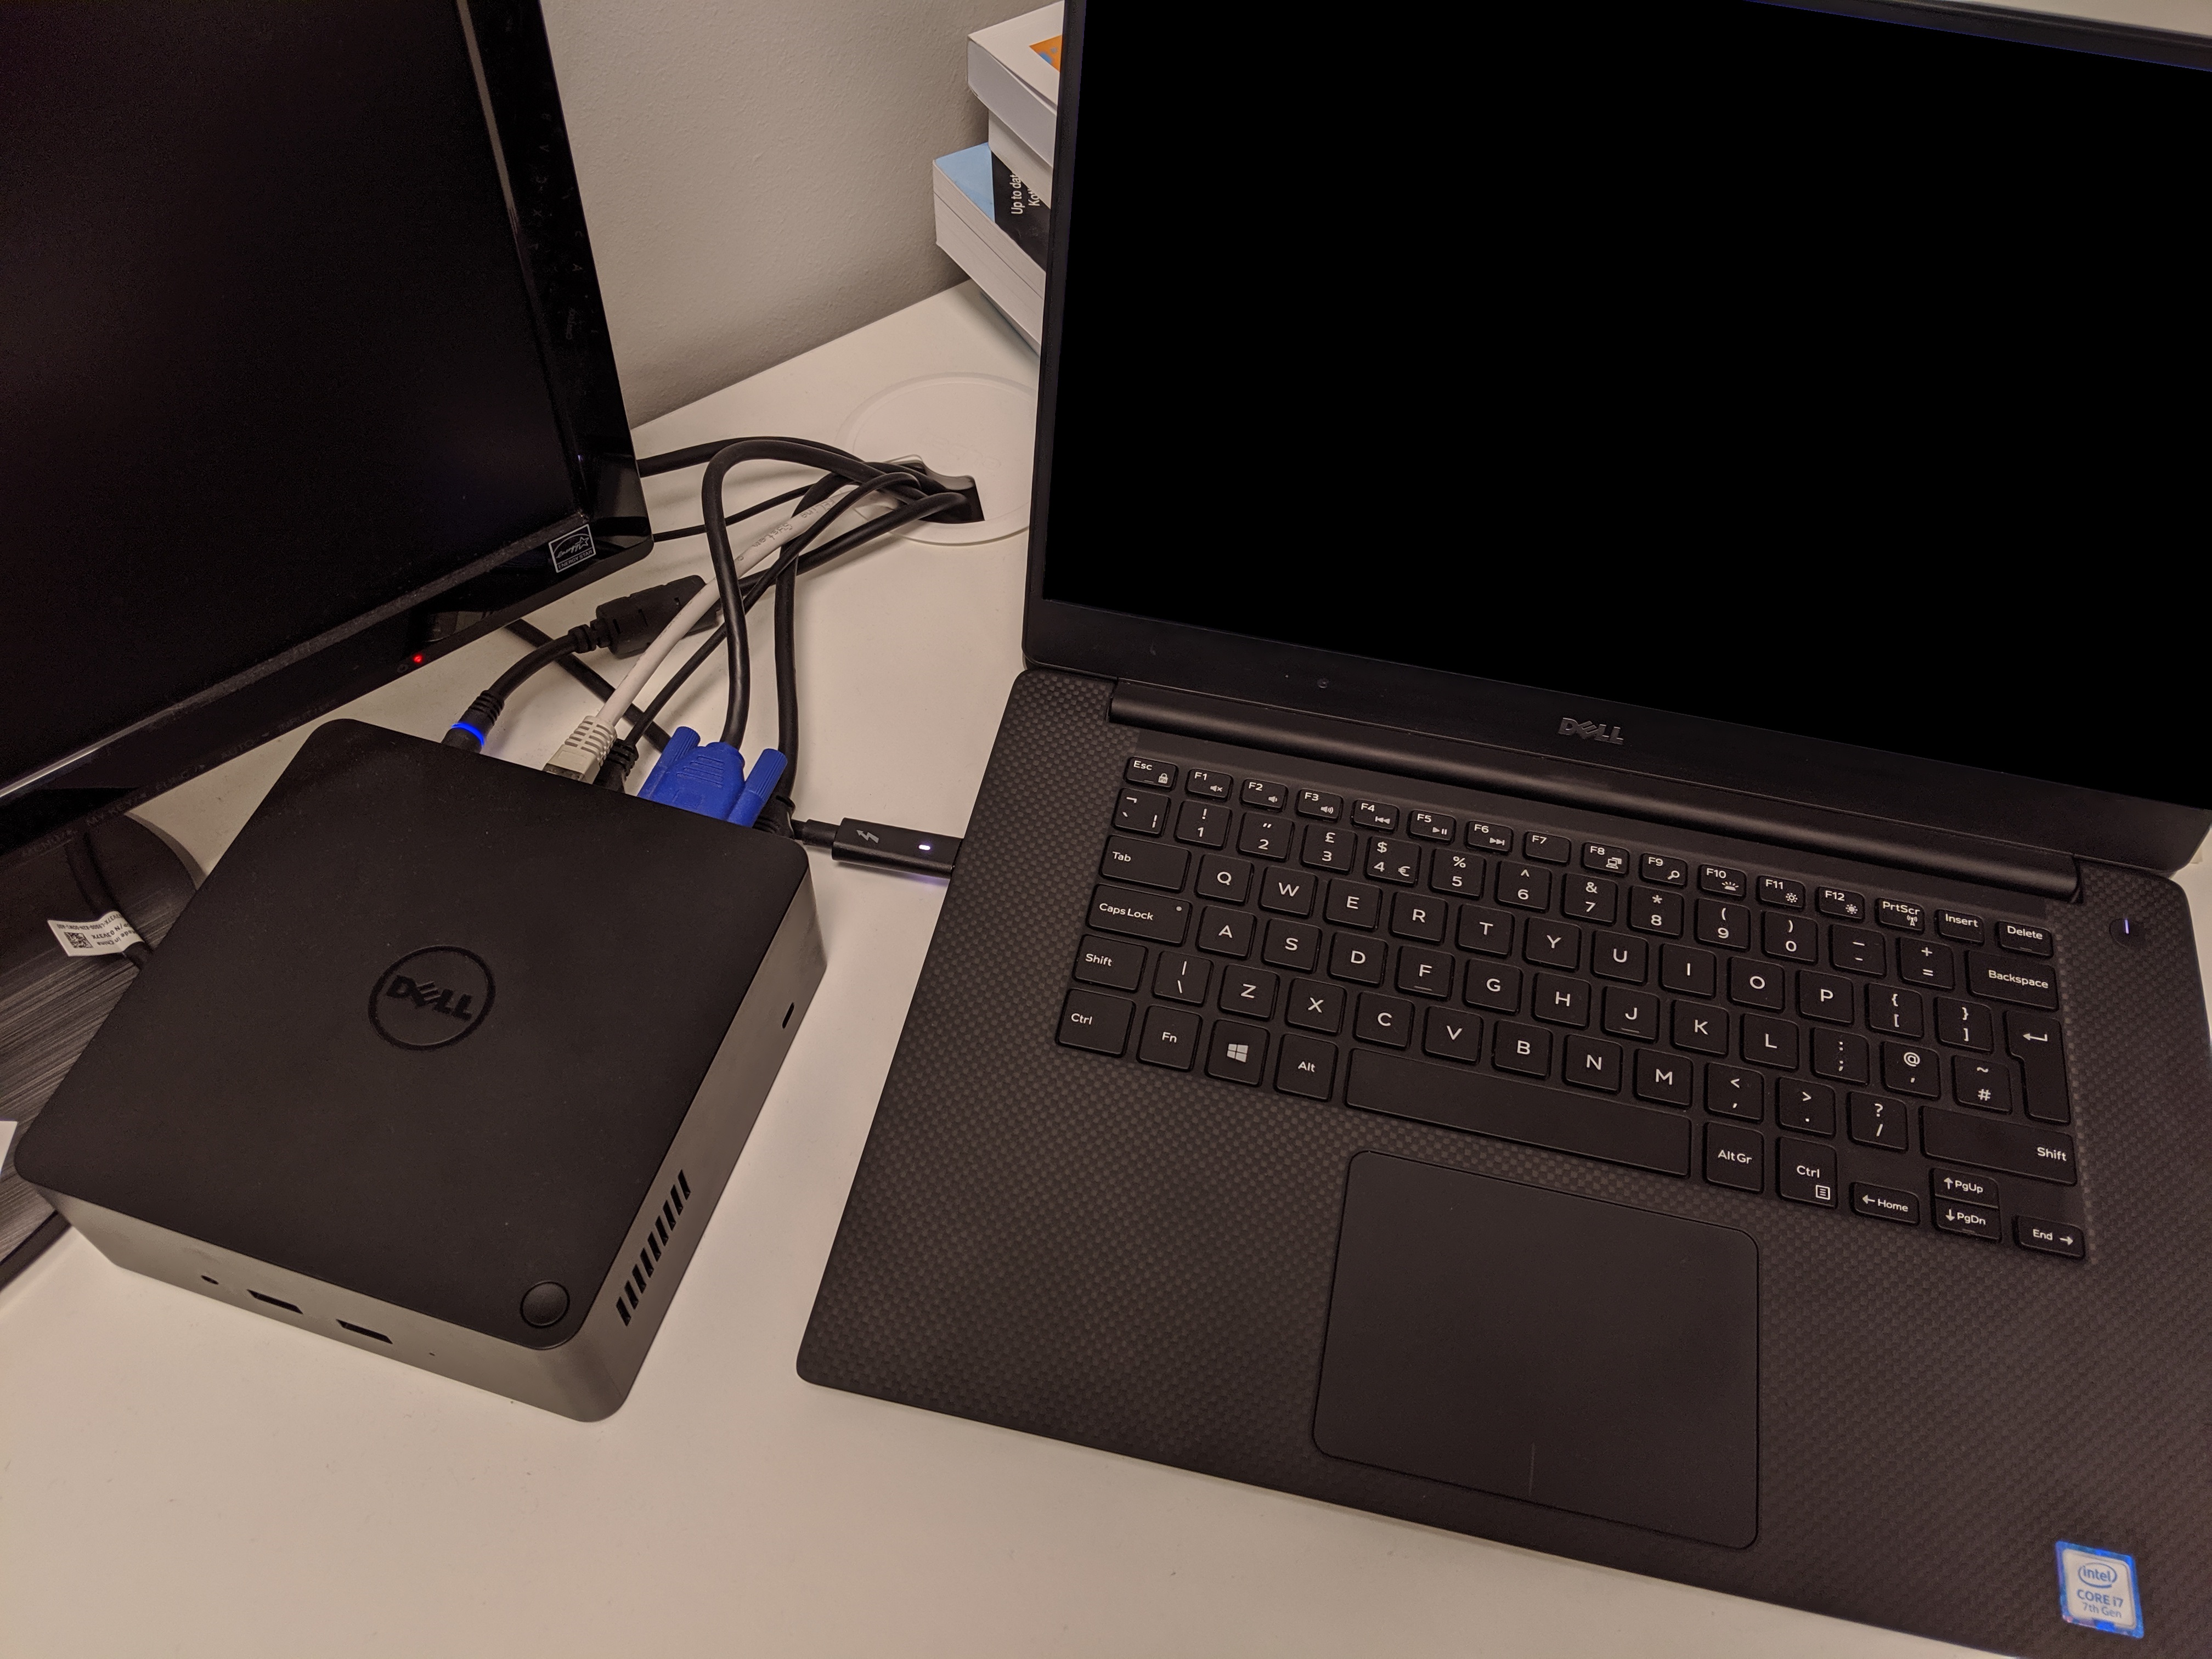 My old work setup with an XPS-15 and a TB16 dock